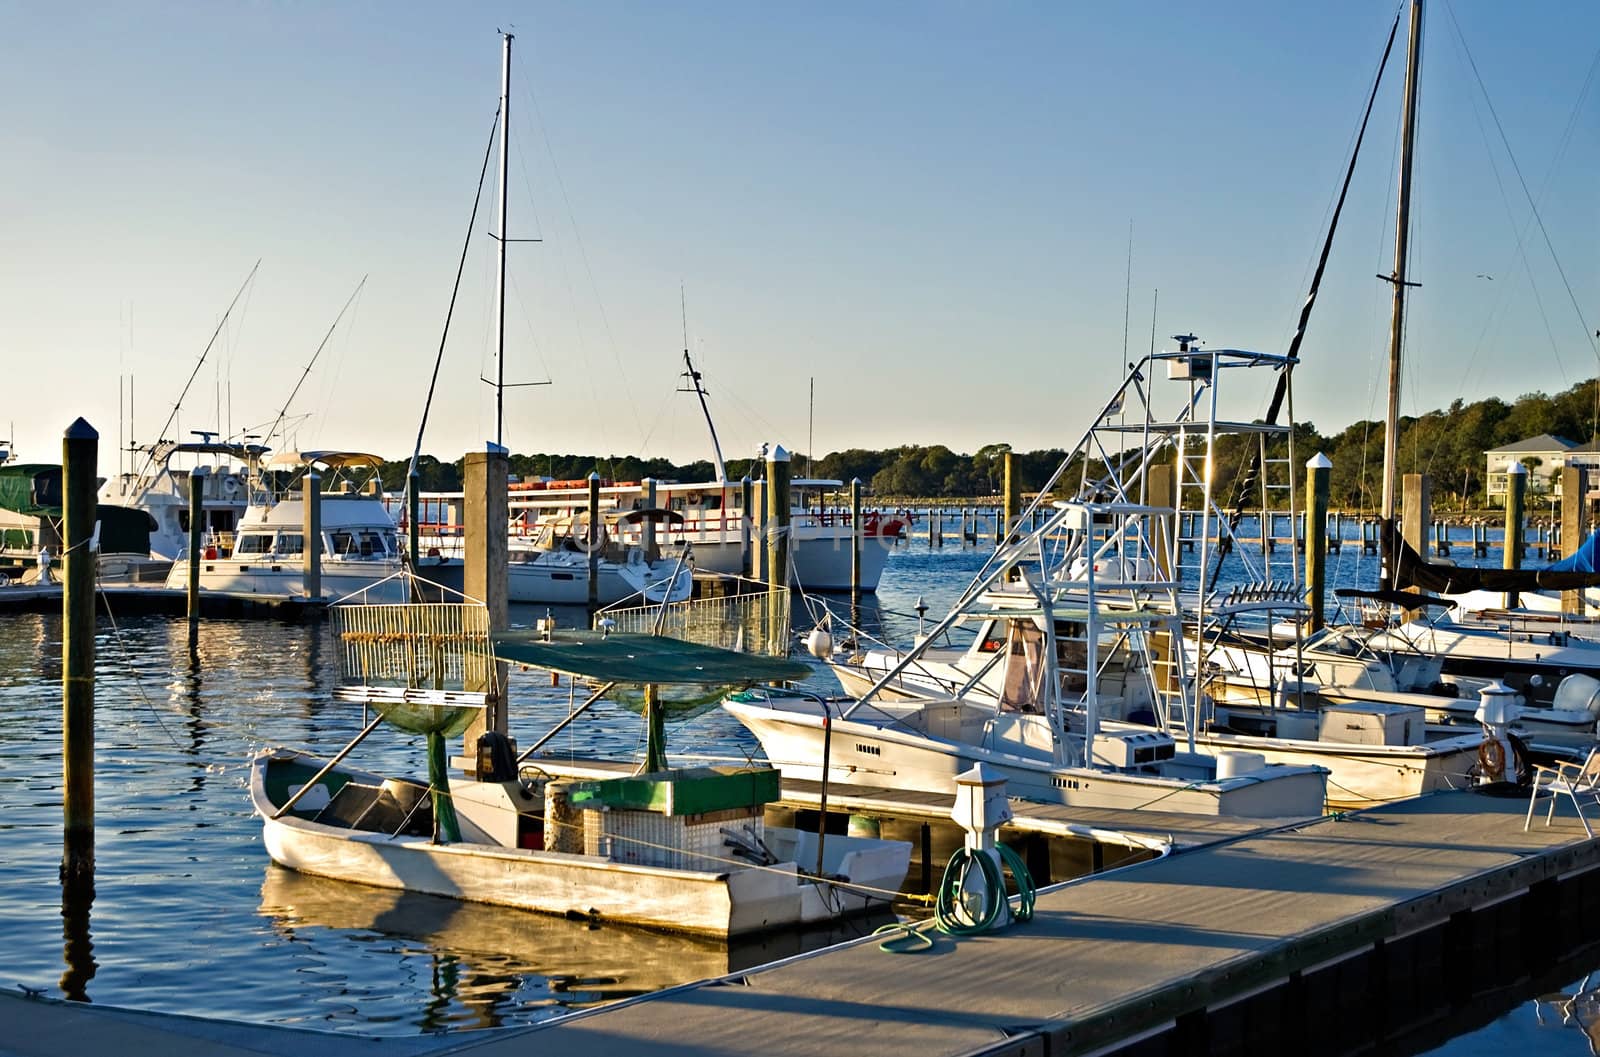 Boats at the Wharf in the Evening by Noonie